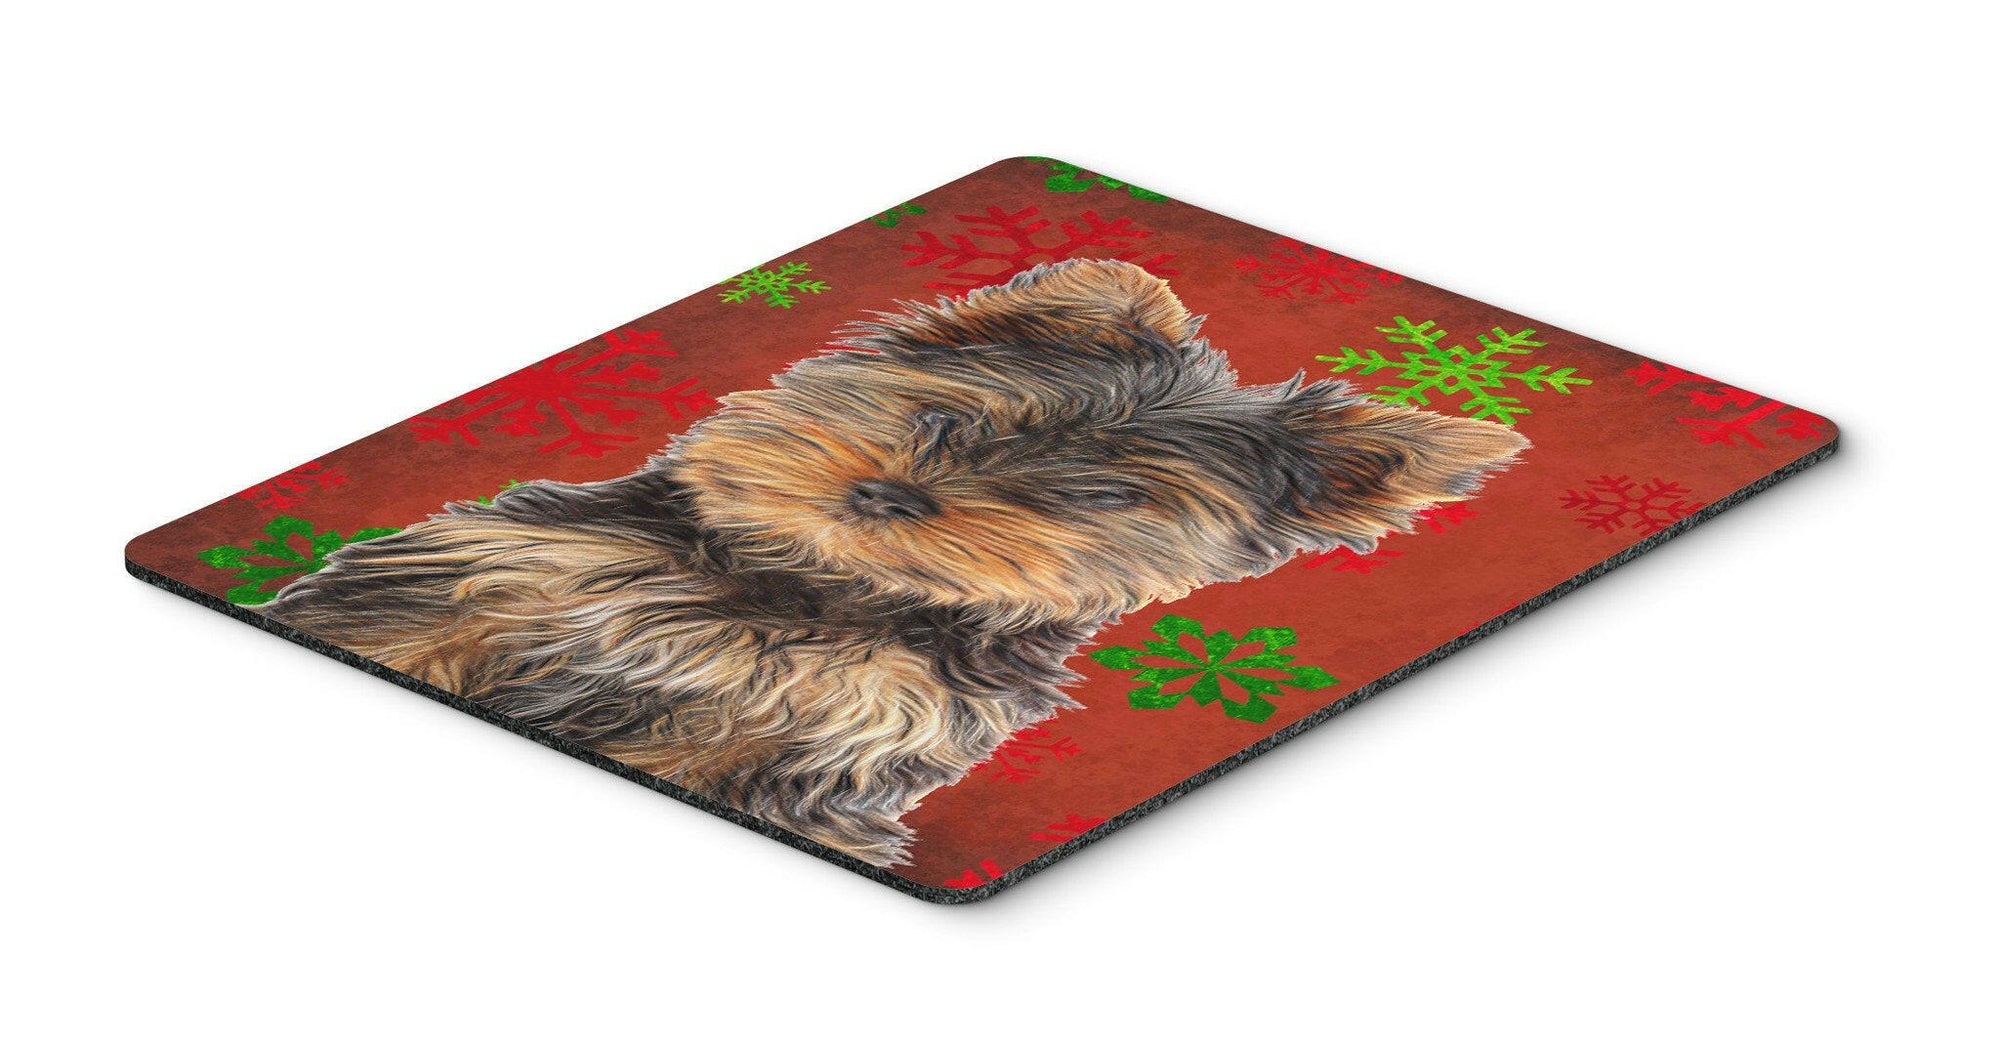 Red Snowflakes Holiday Christmas Yorkie Puppy / Yorkshire Terrier Mouse Pad, Hot Pad or Trivet KJ1188MP by Caroline's Treasures